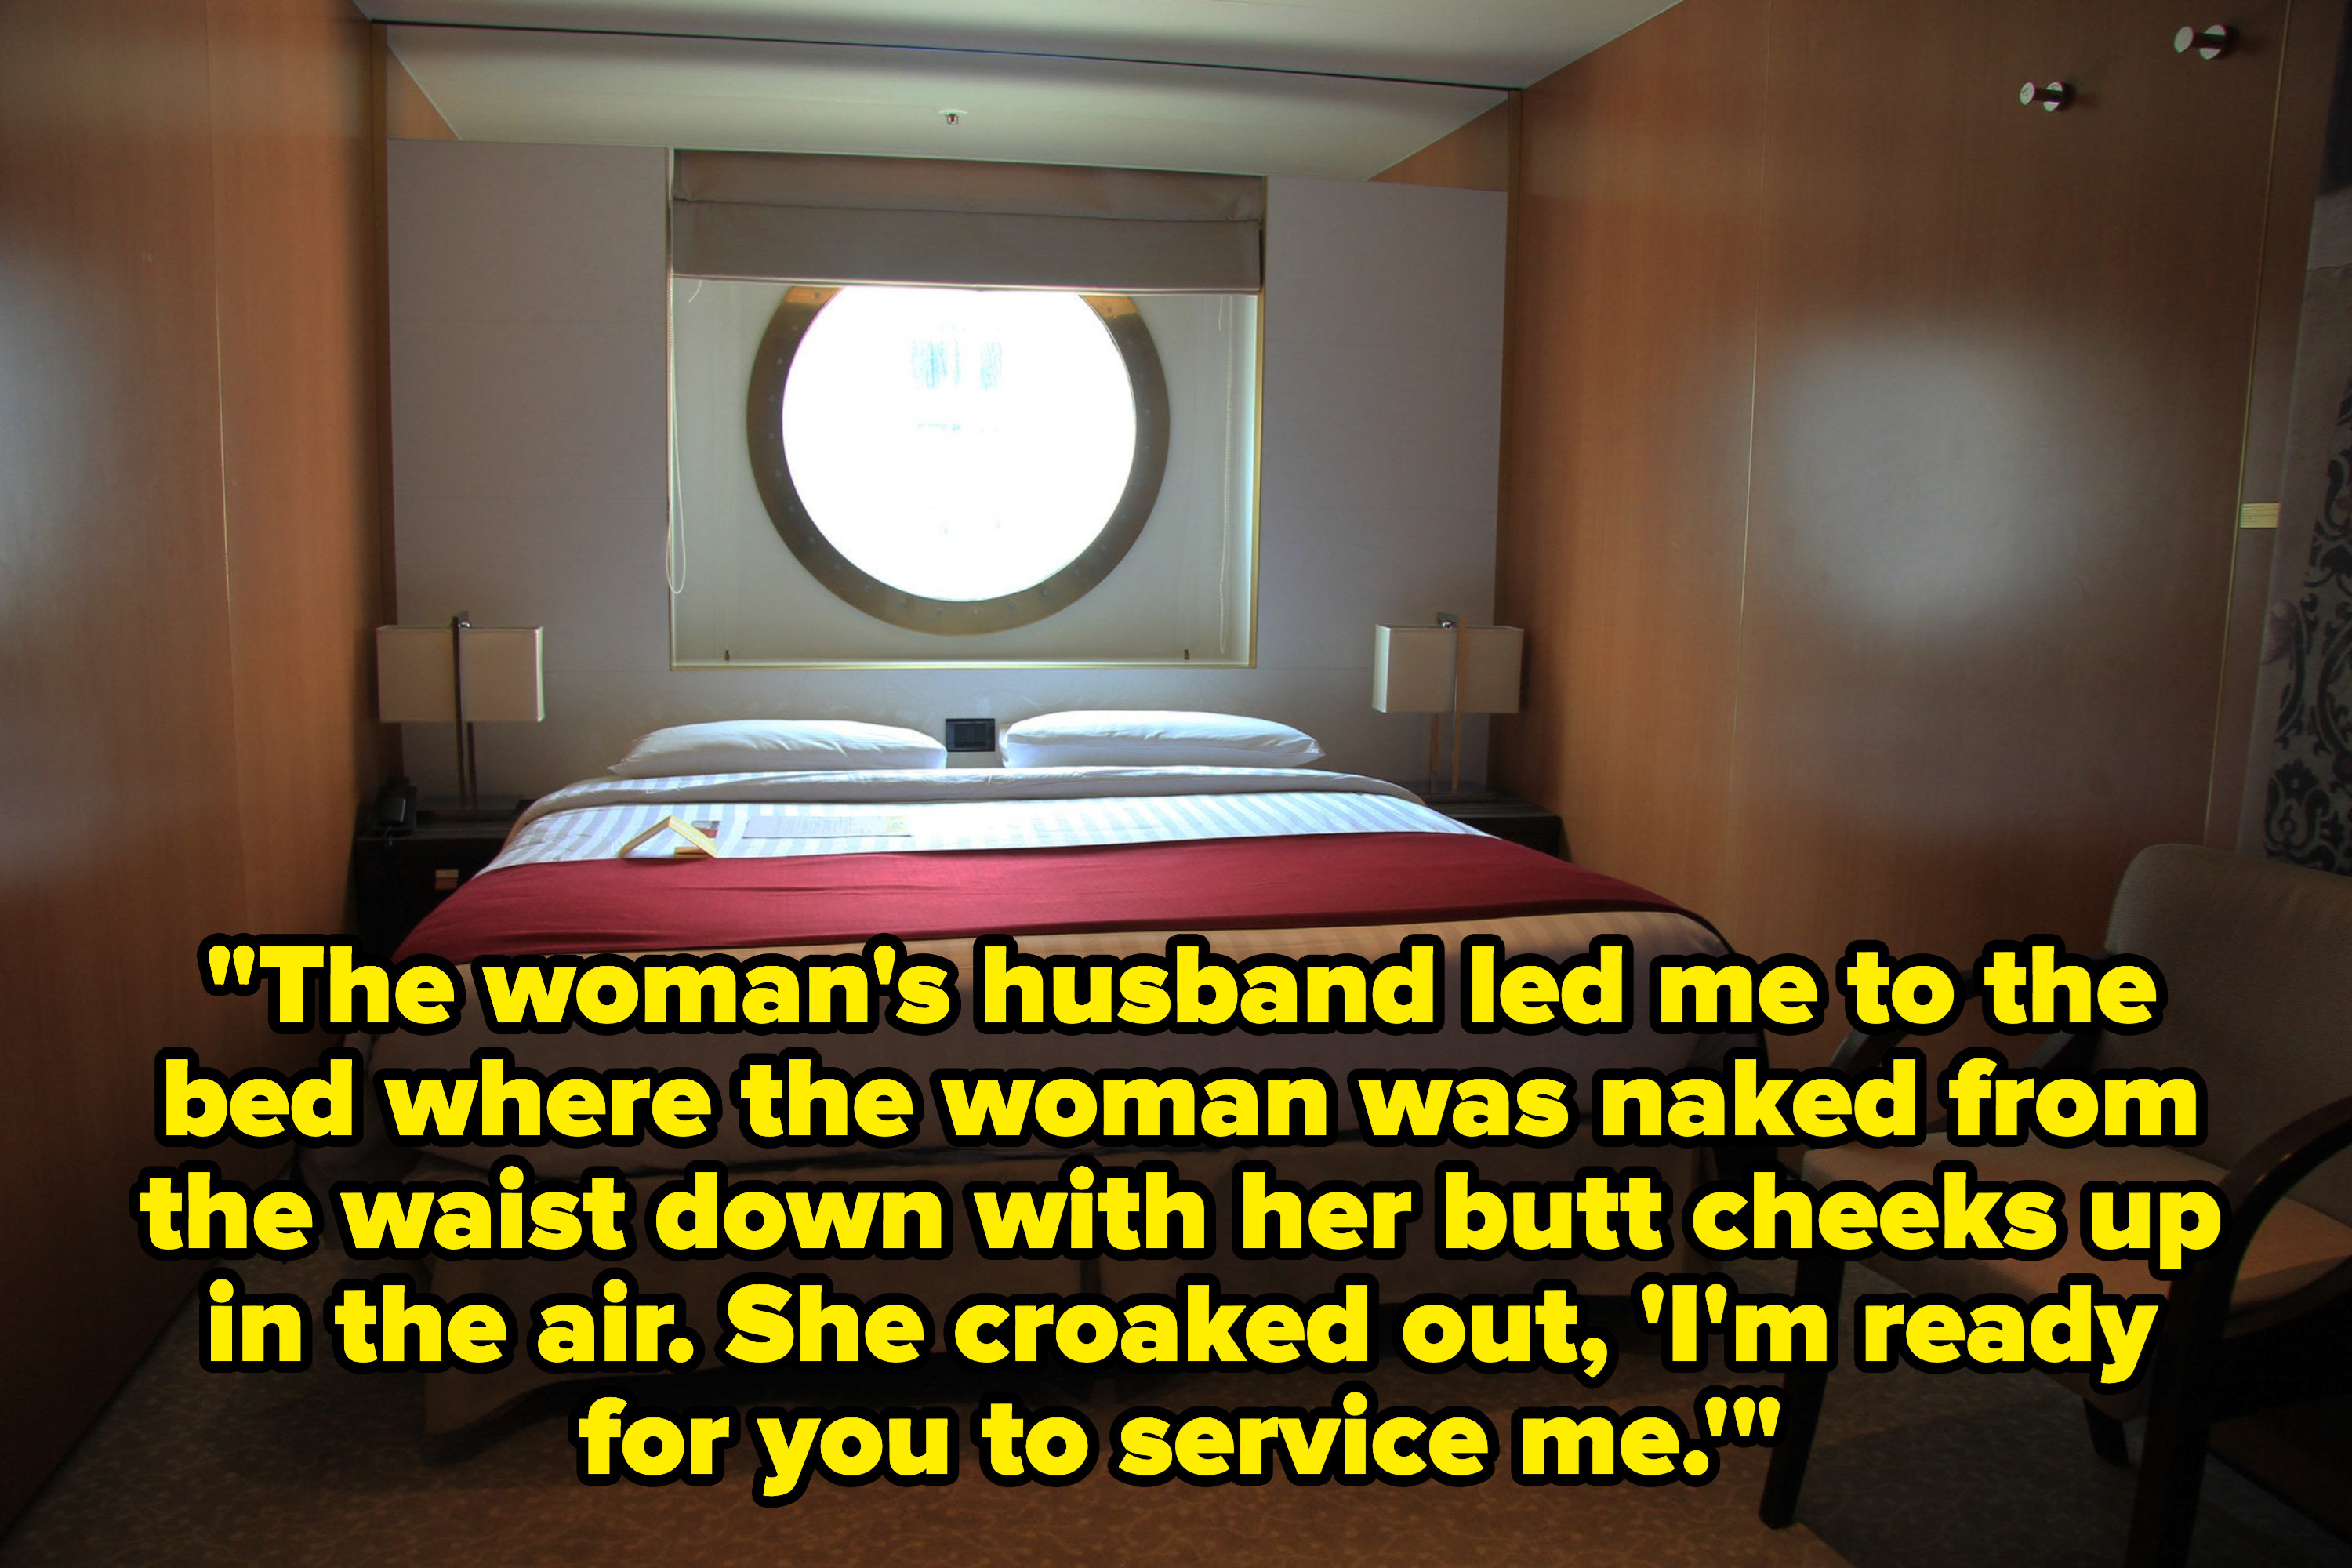 cruiseship stateroom with the text, &quot;The woman&#x27;s husband led me to the bed where the woman was naked from the waist down with her butt cheeks up in the air. She croaked out, &#x27;I&#x27;m ready for you to service me&quot;